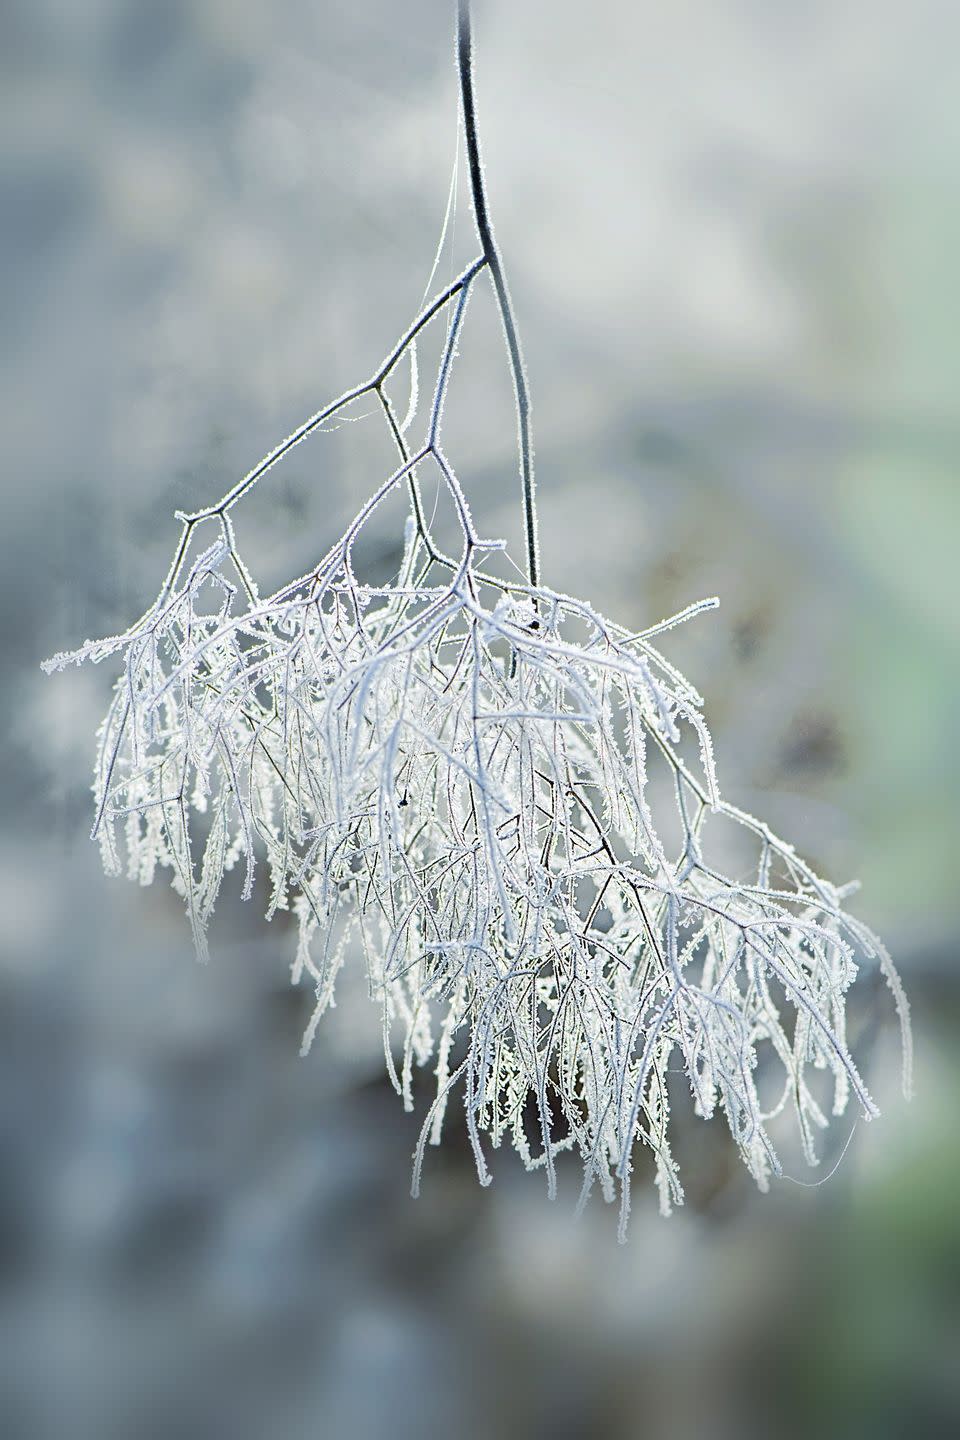 the remains of a smoke bush, smoketree or cotinus coggygriaf lower covered in a winter frost